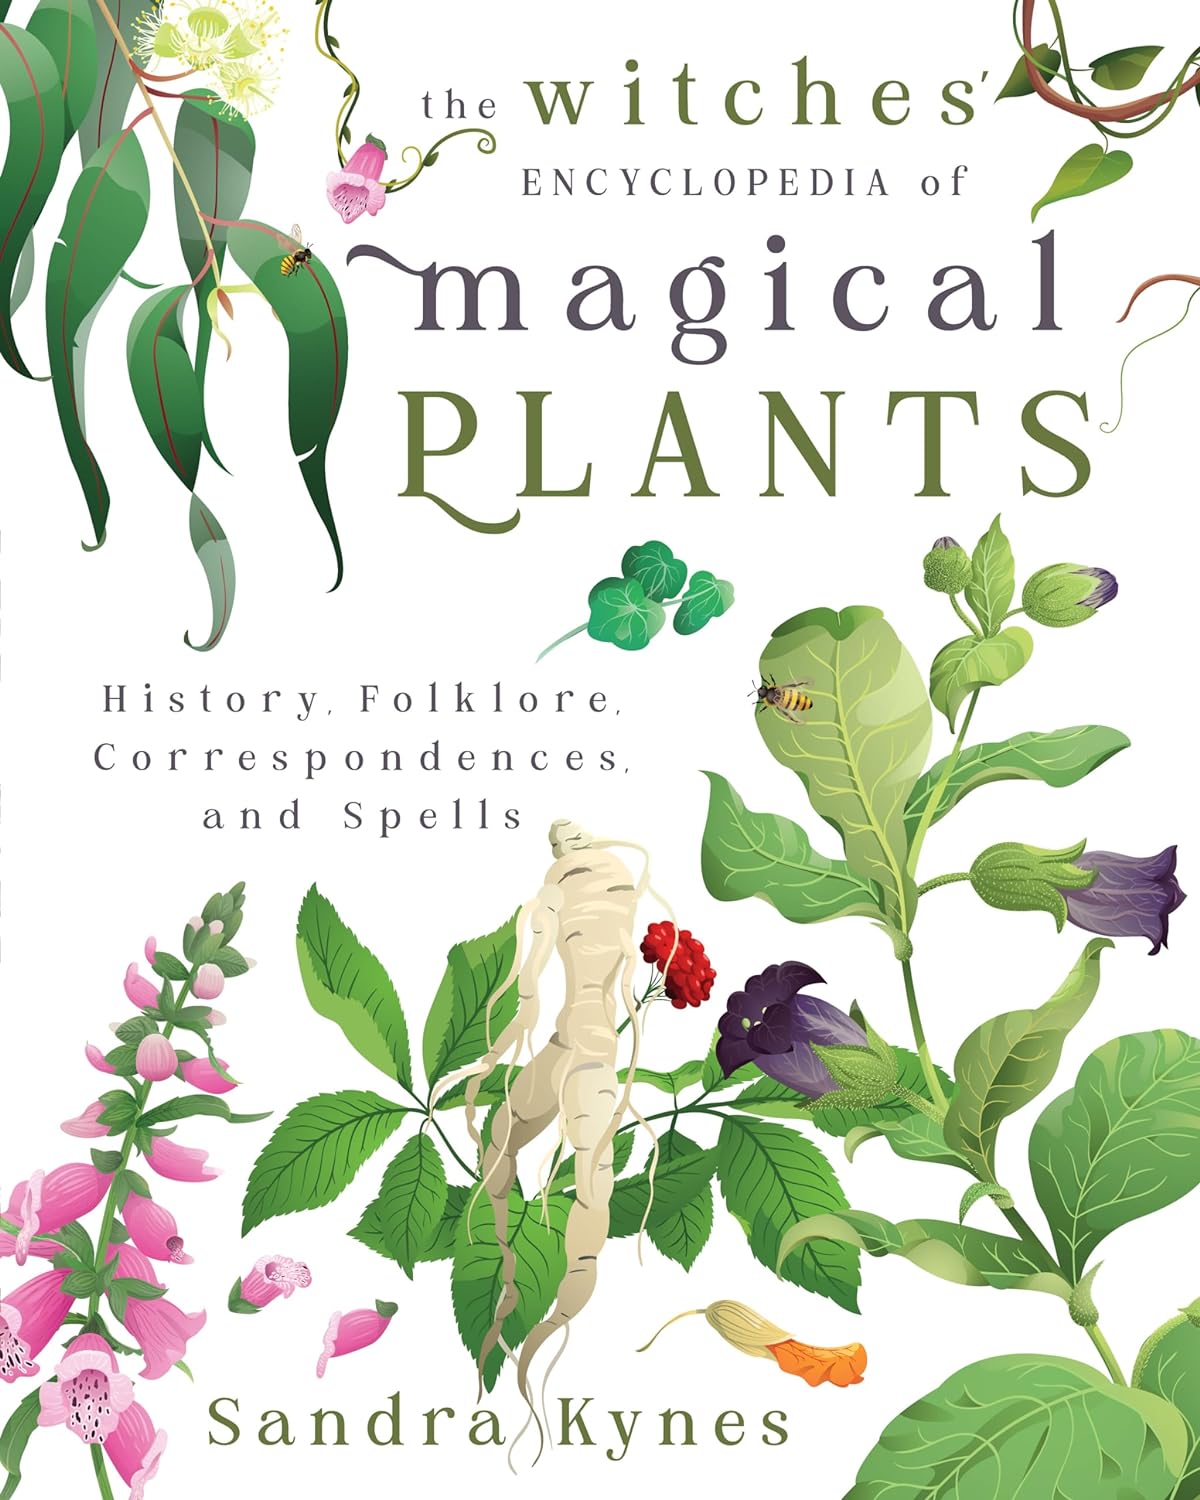 The Witches' Encyclopedia of Magical Plants: History, Folklore, Correspondences, and Spells